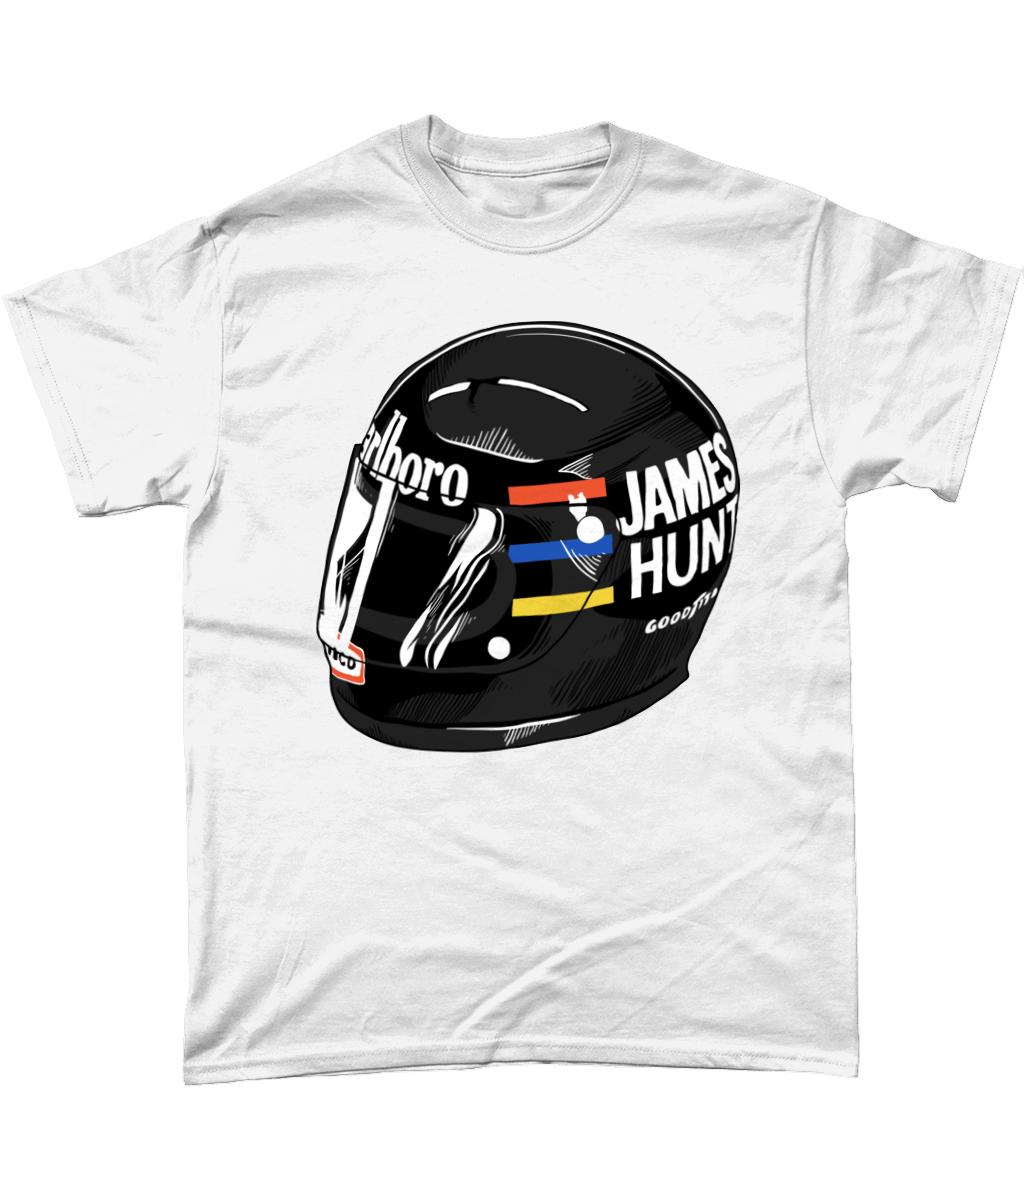 fathers day gift guide james hunt helmet t shirt